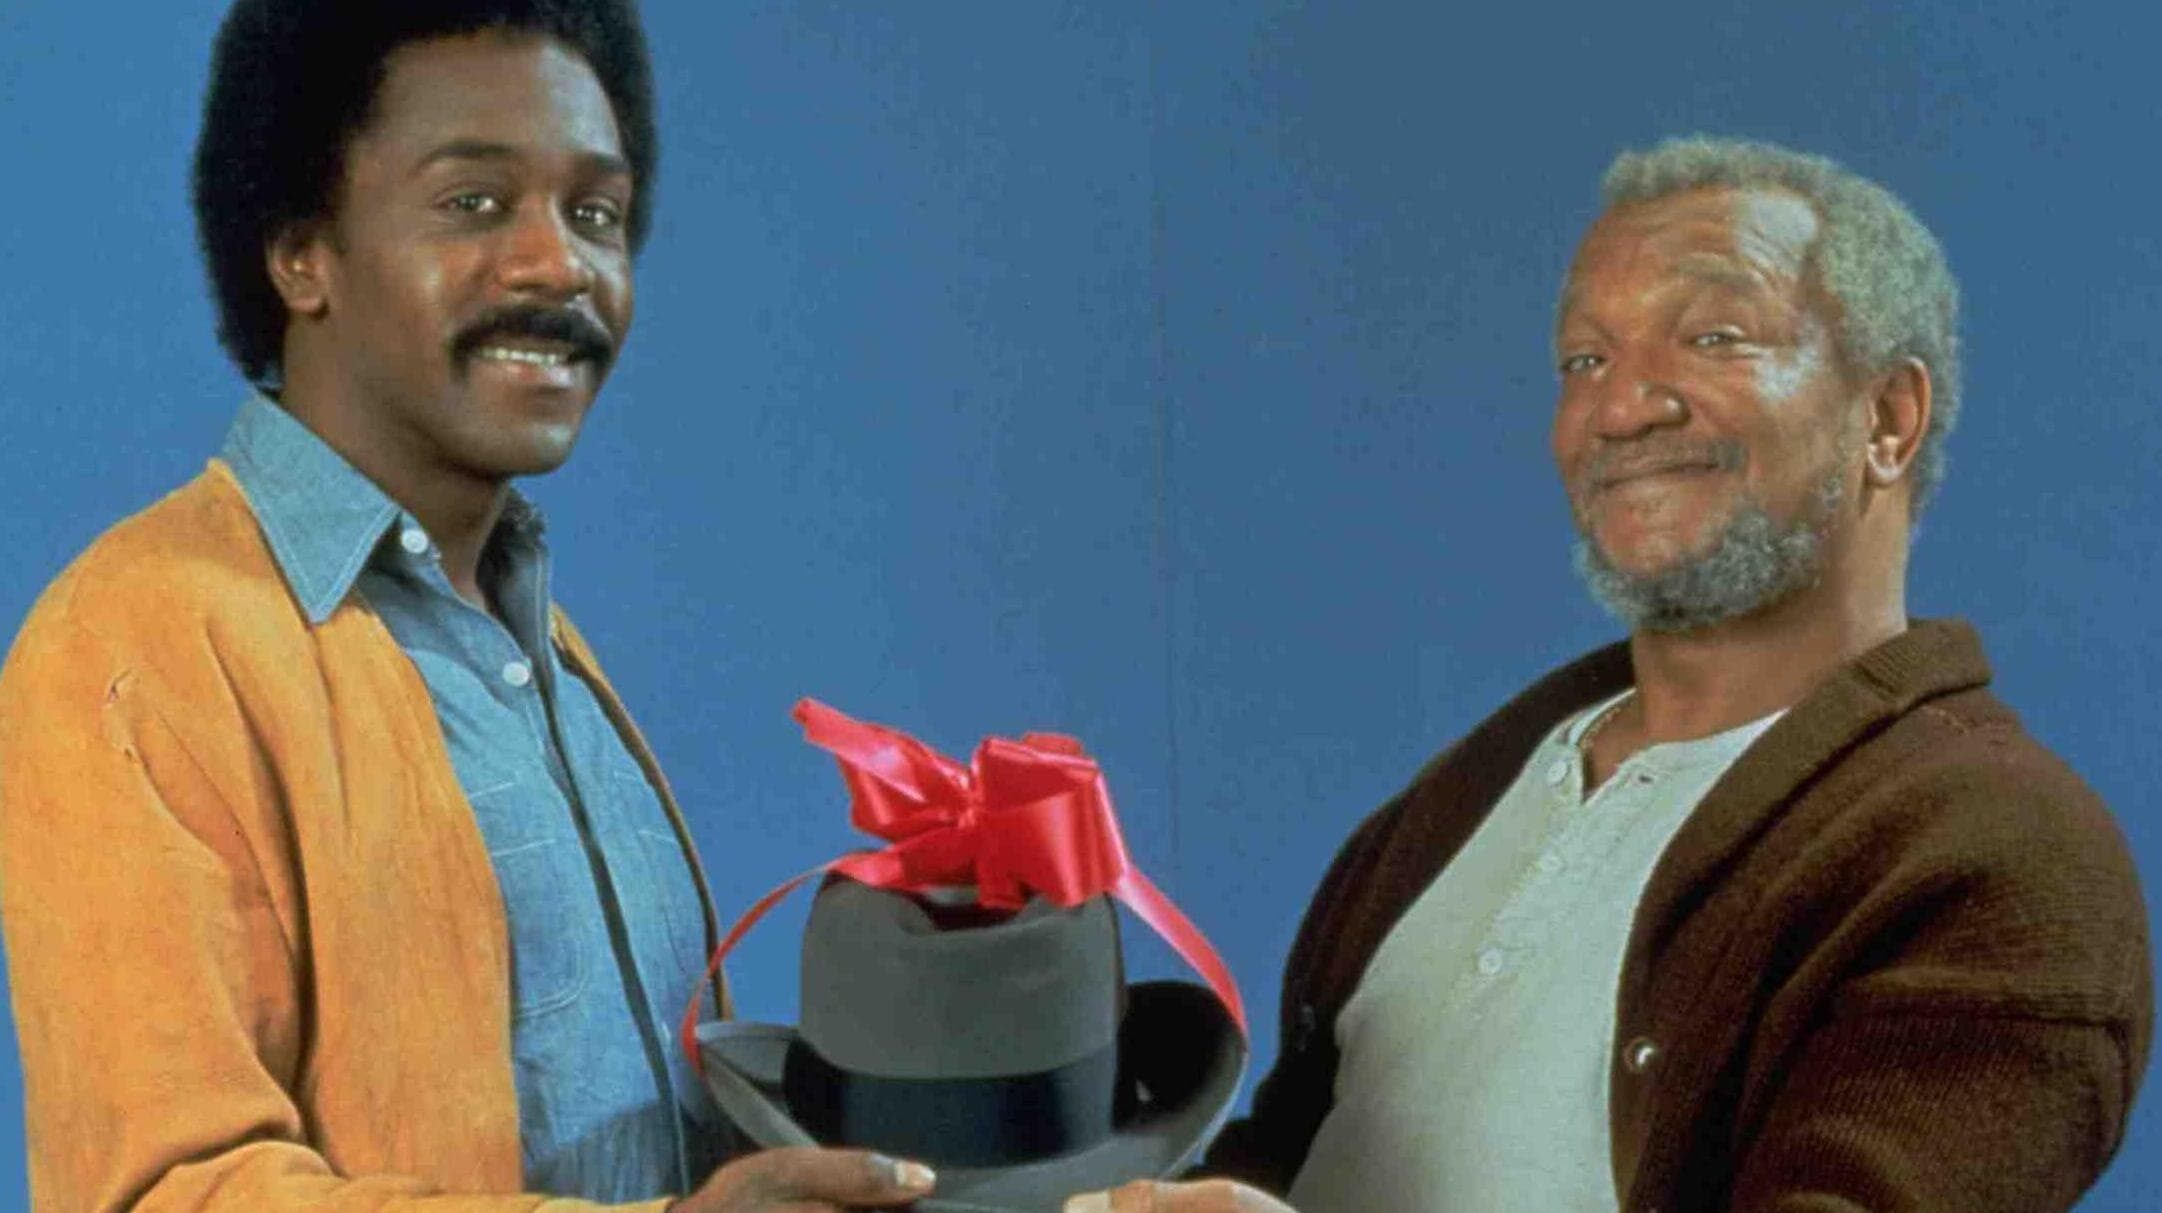 Black TV Shows 70s and 80s - Sanford and Son